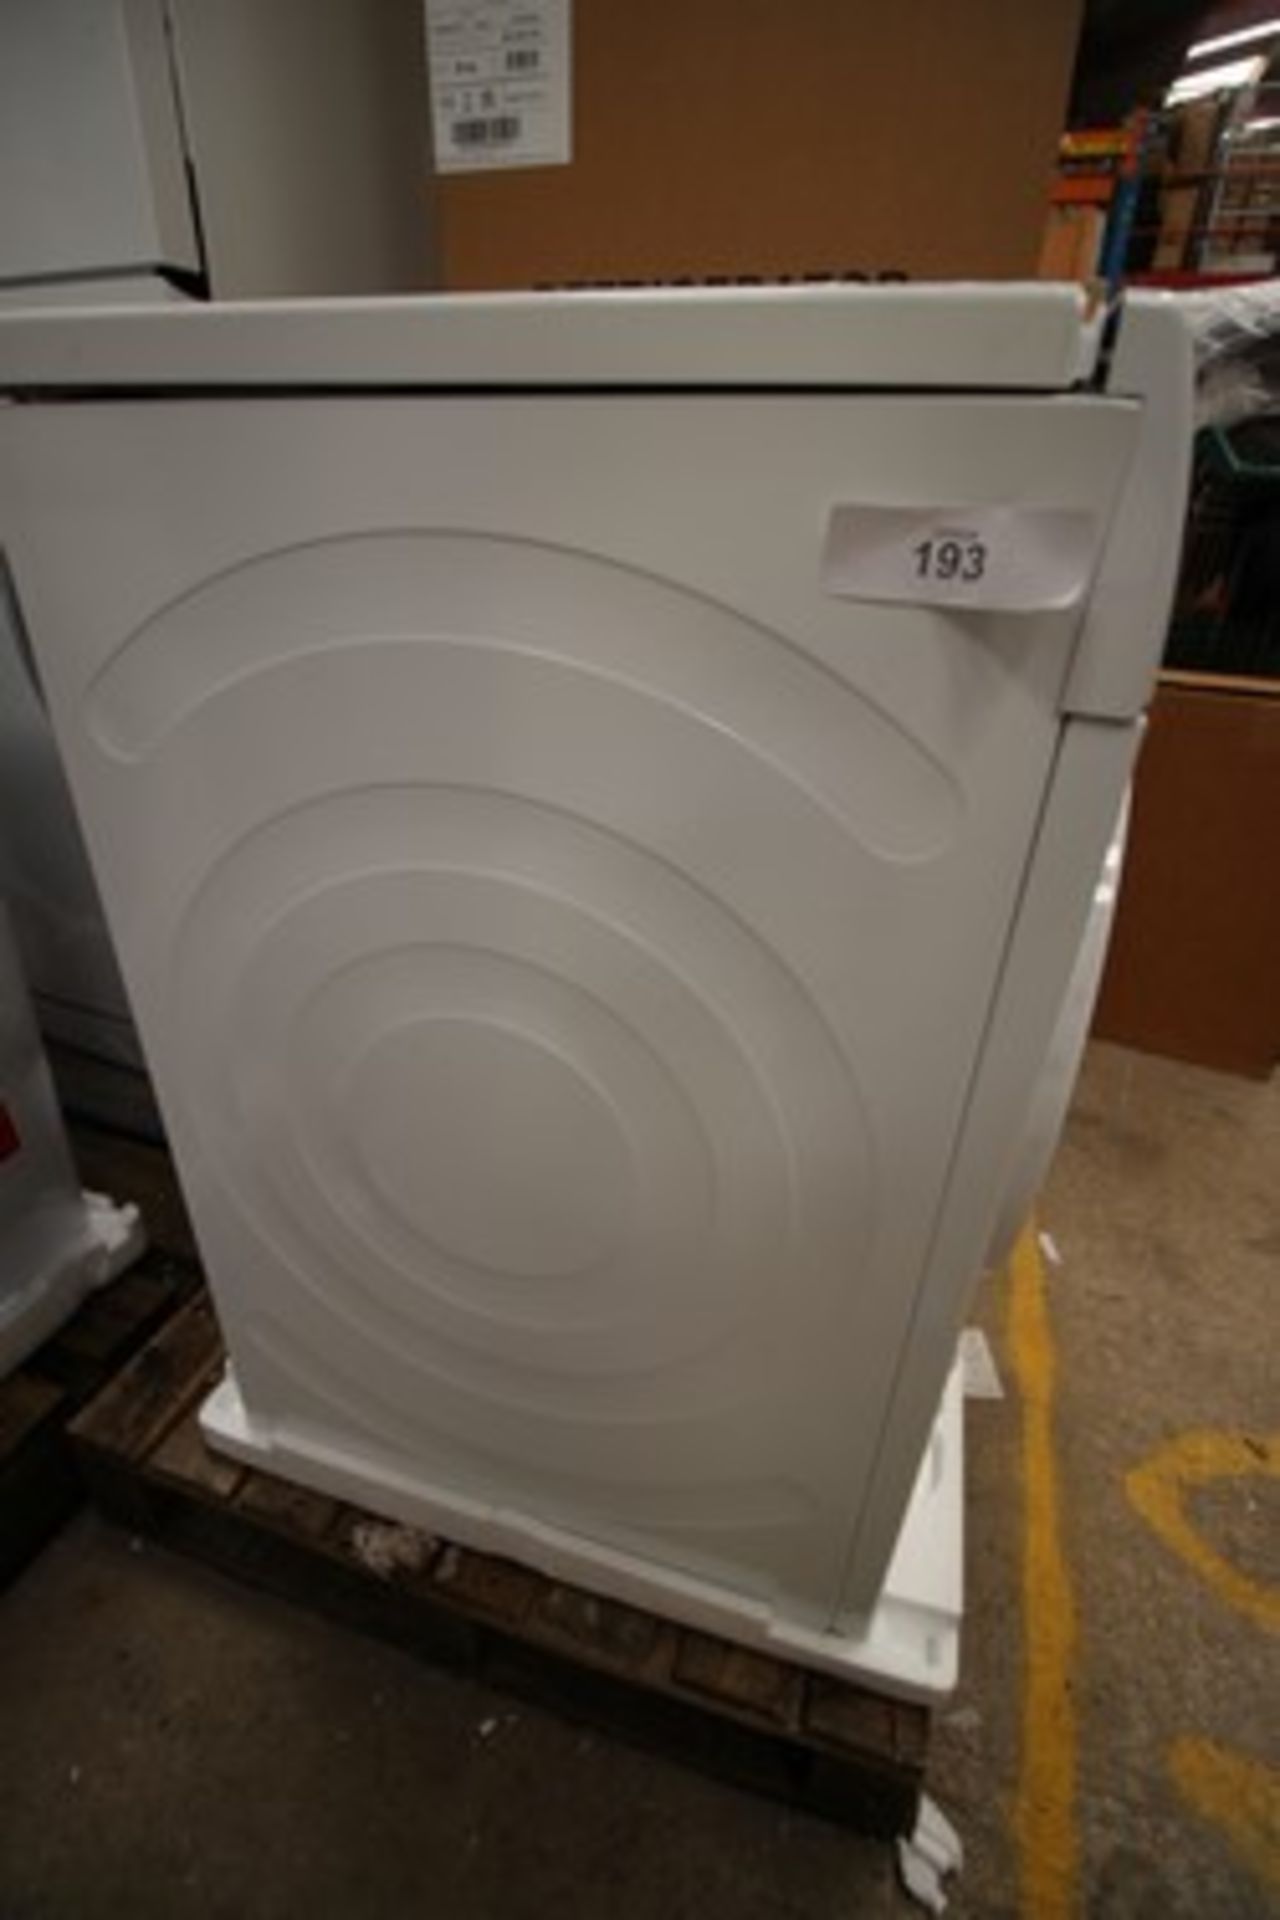 1 x Bosch Serie 4 tumble dryer machine, Model WTH84001GB, damaged control panel and top panel - - Image 3 of 3